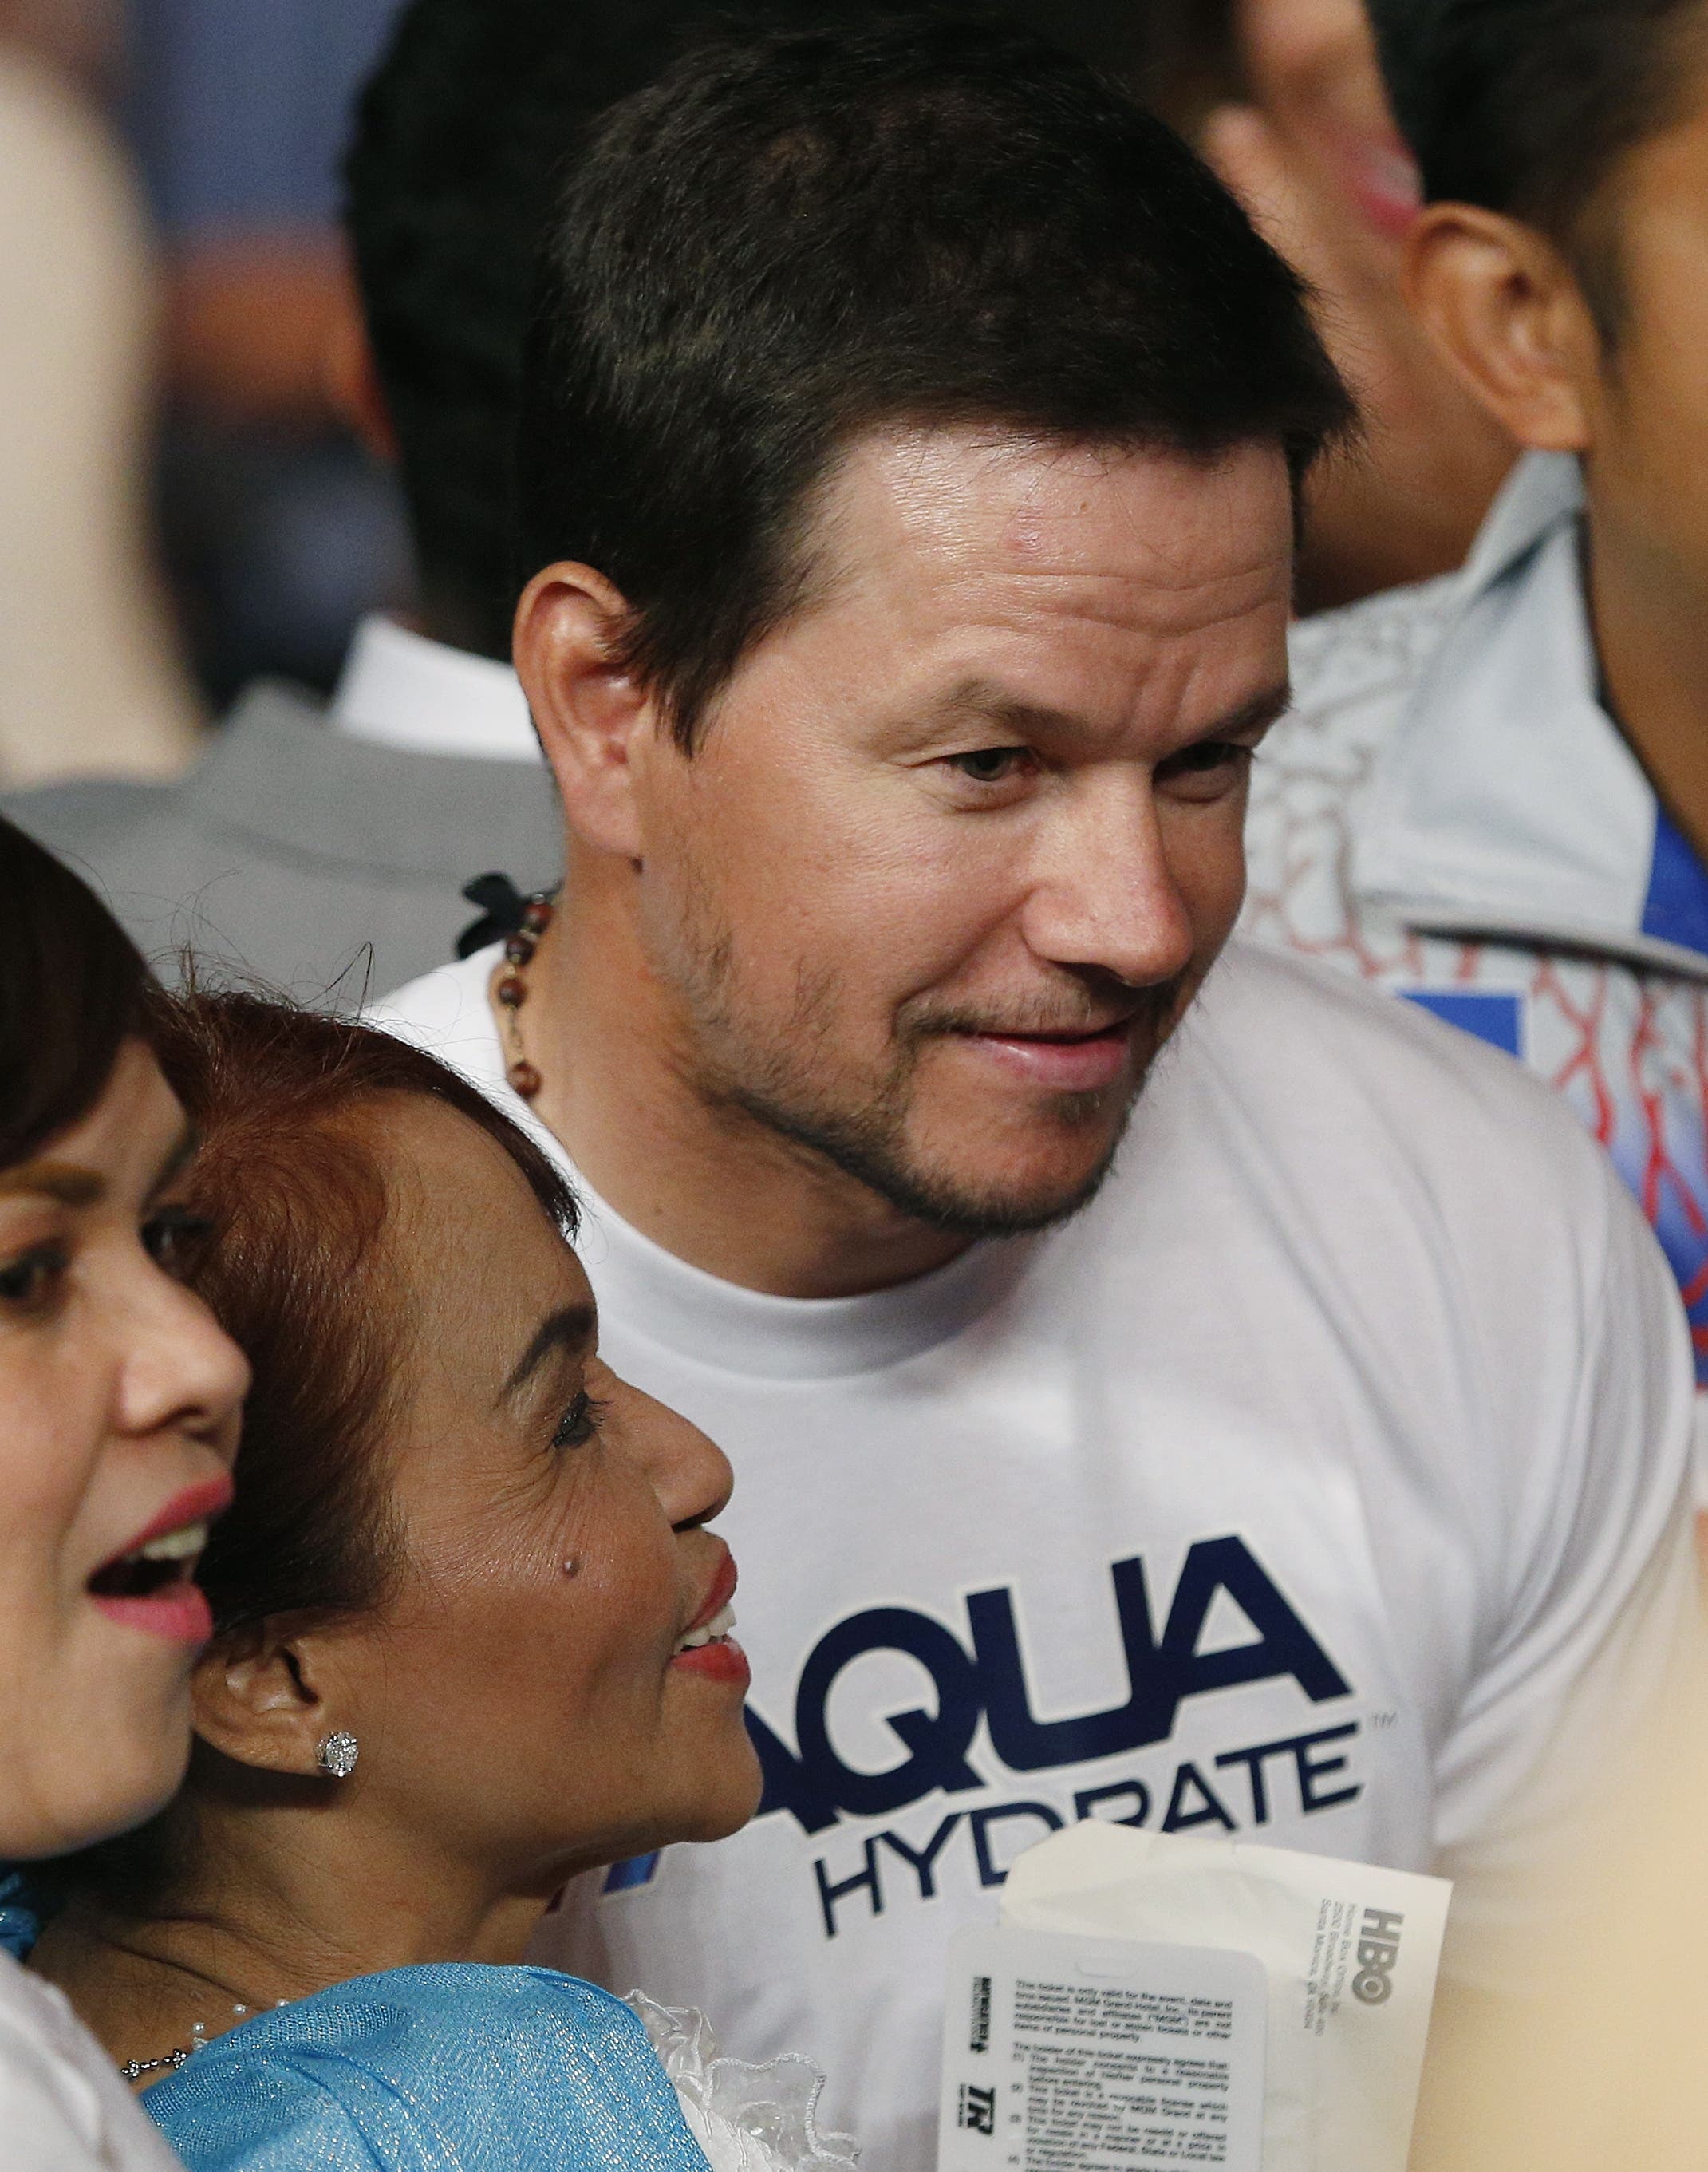 Actor Mark Wahlberg joins the crowd before the start of the world welterweight championship. (AP)